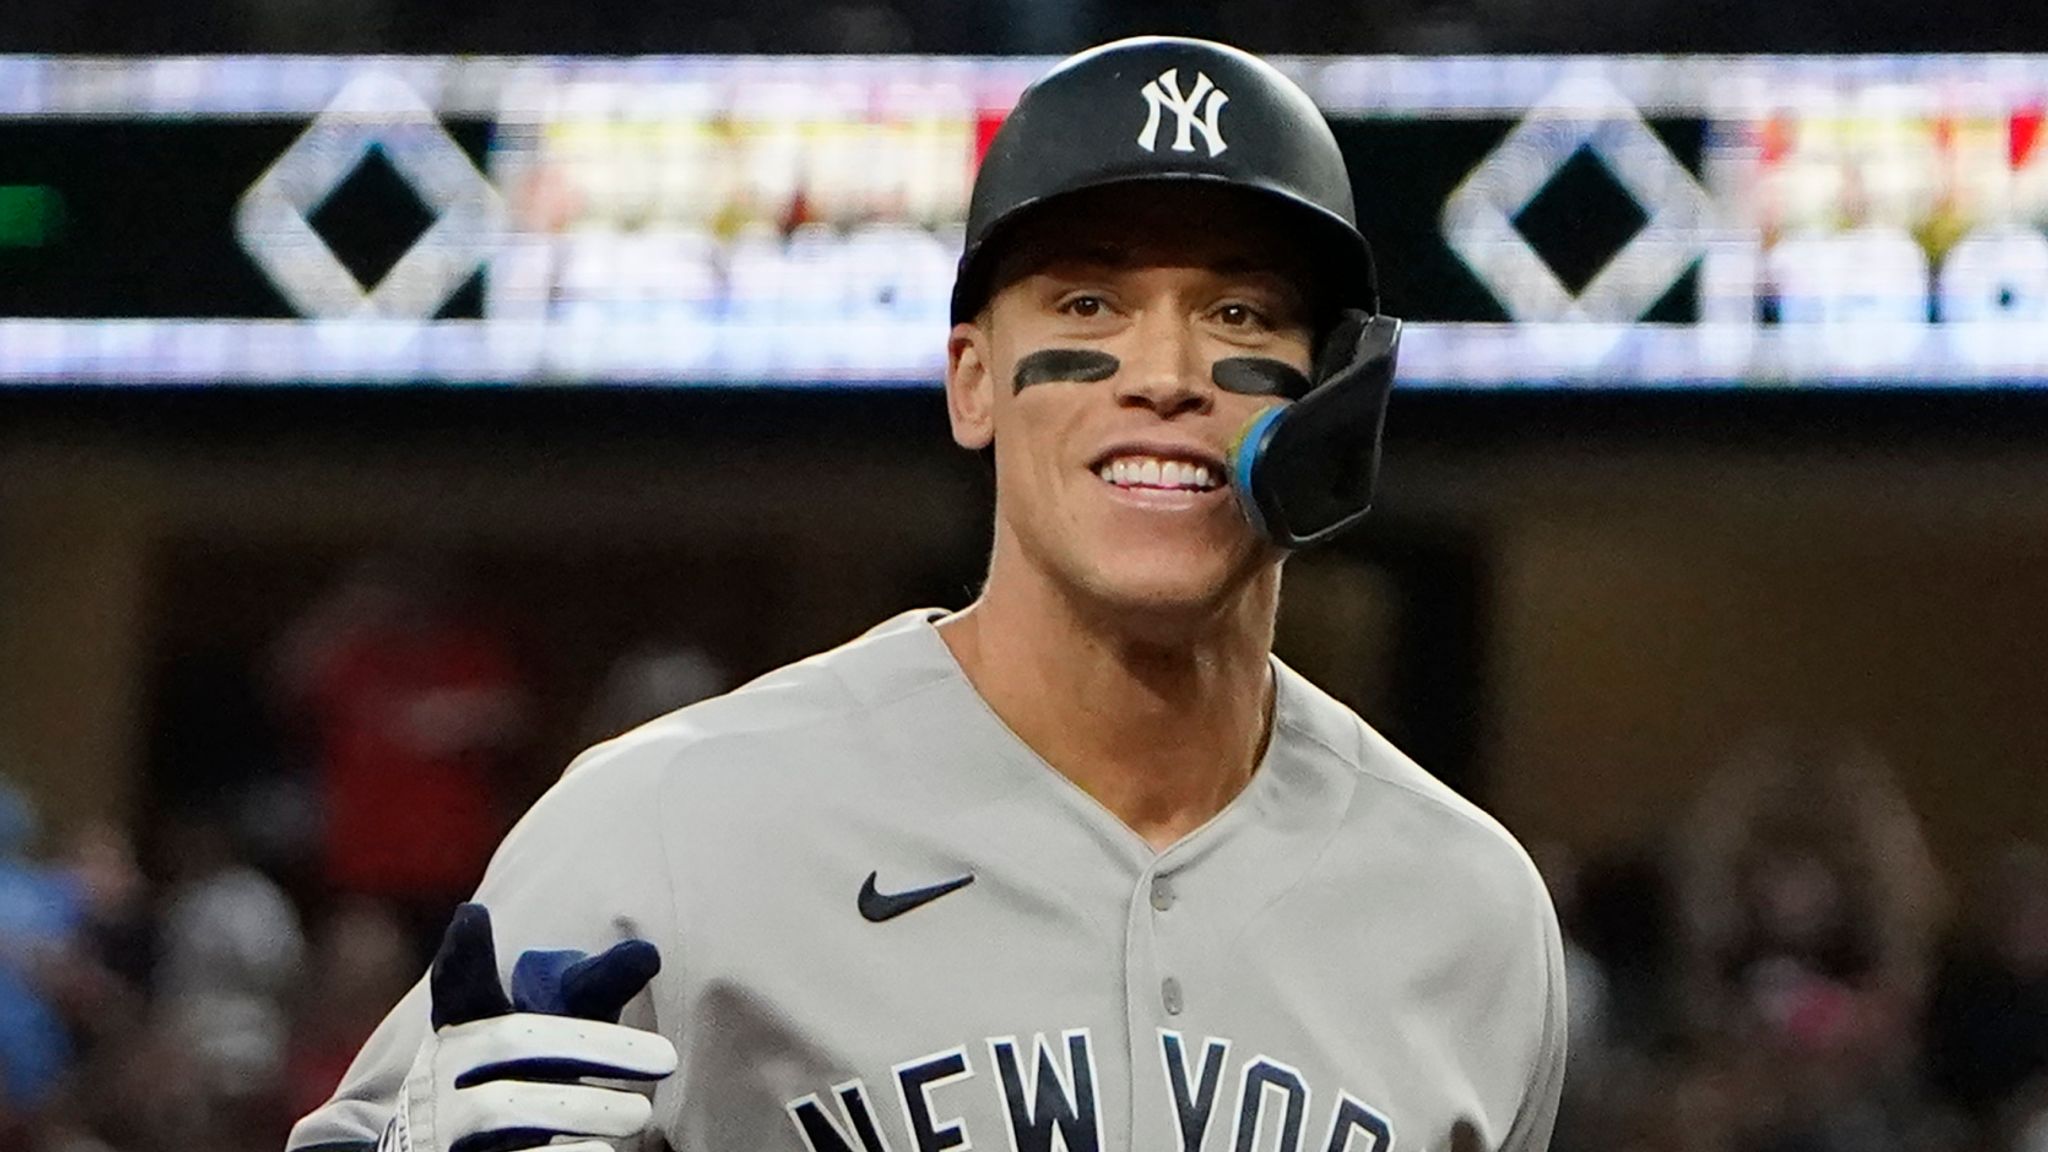 NY Yankees' Aaron Judge scores as AL wins All-Star Game